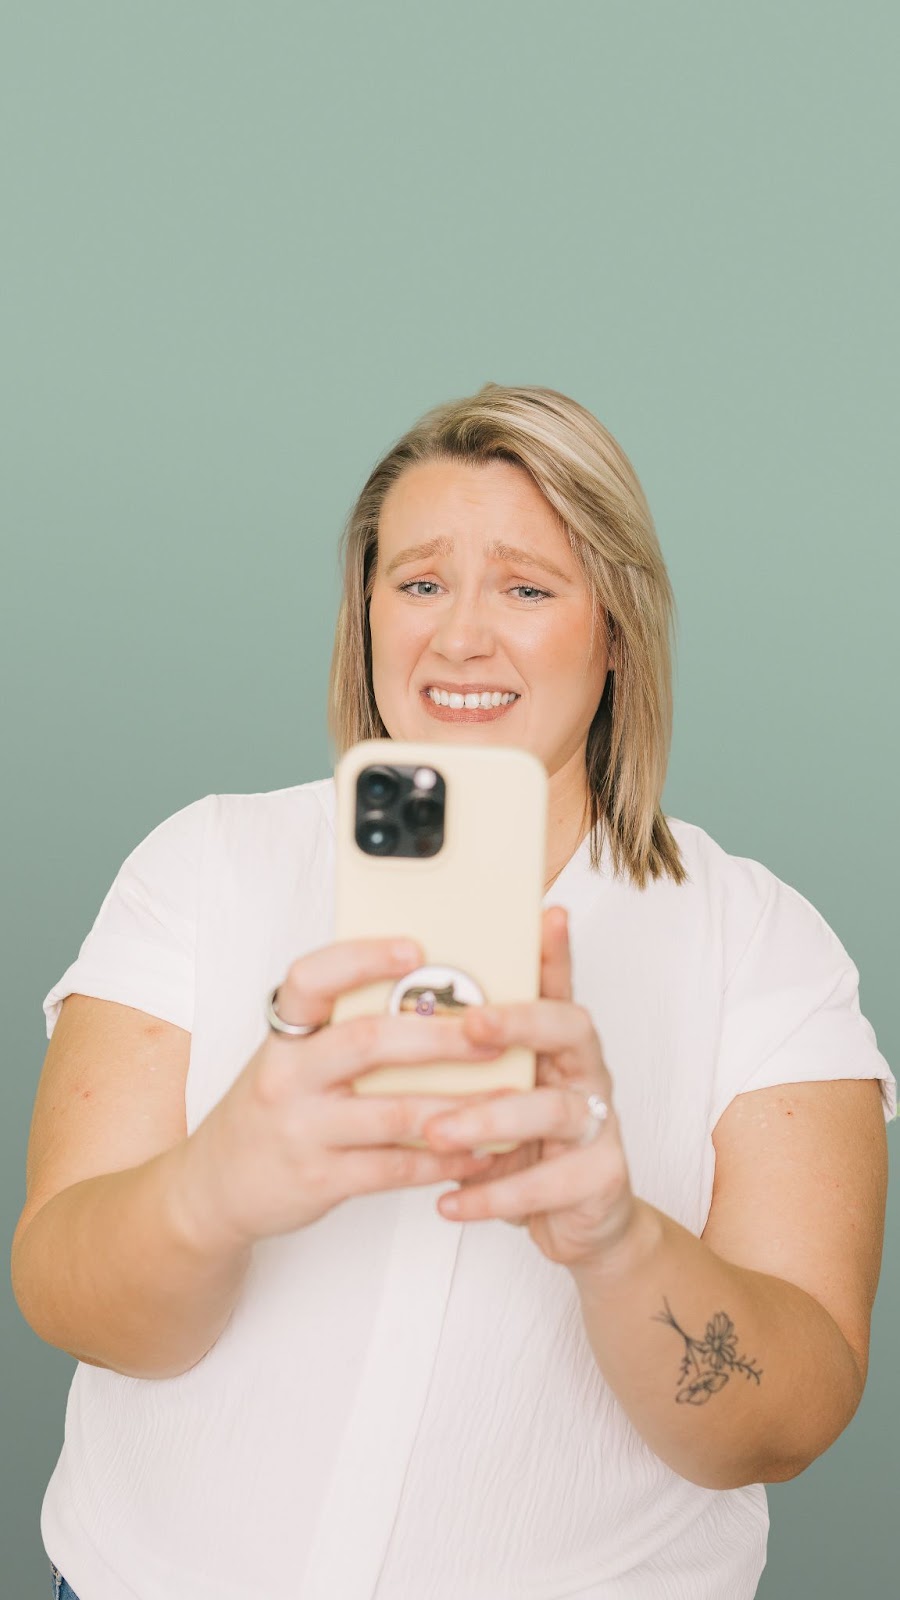 Girl taking selfie with an unsure expression